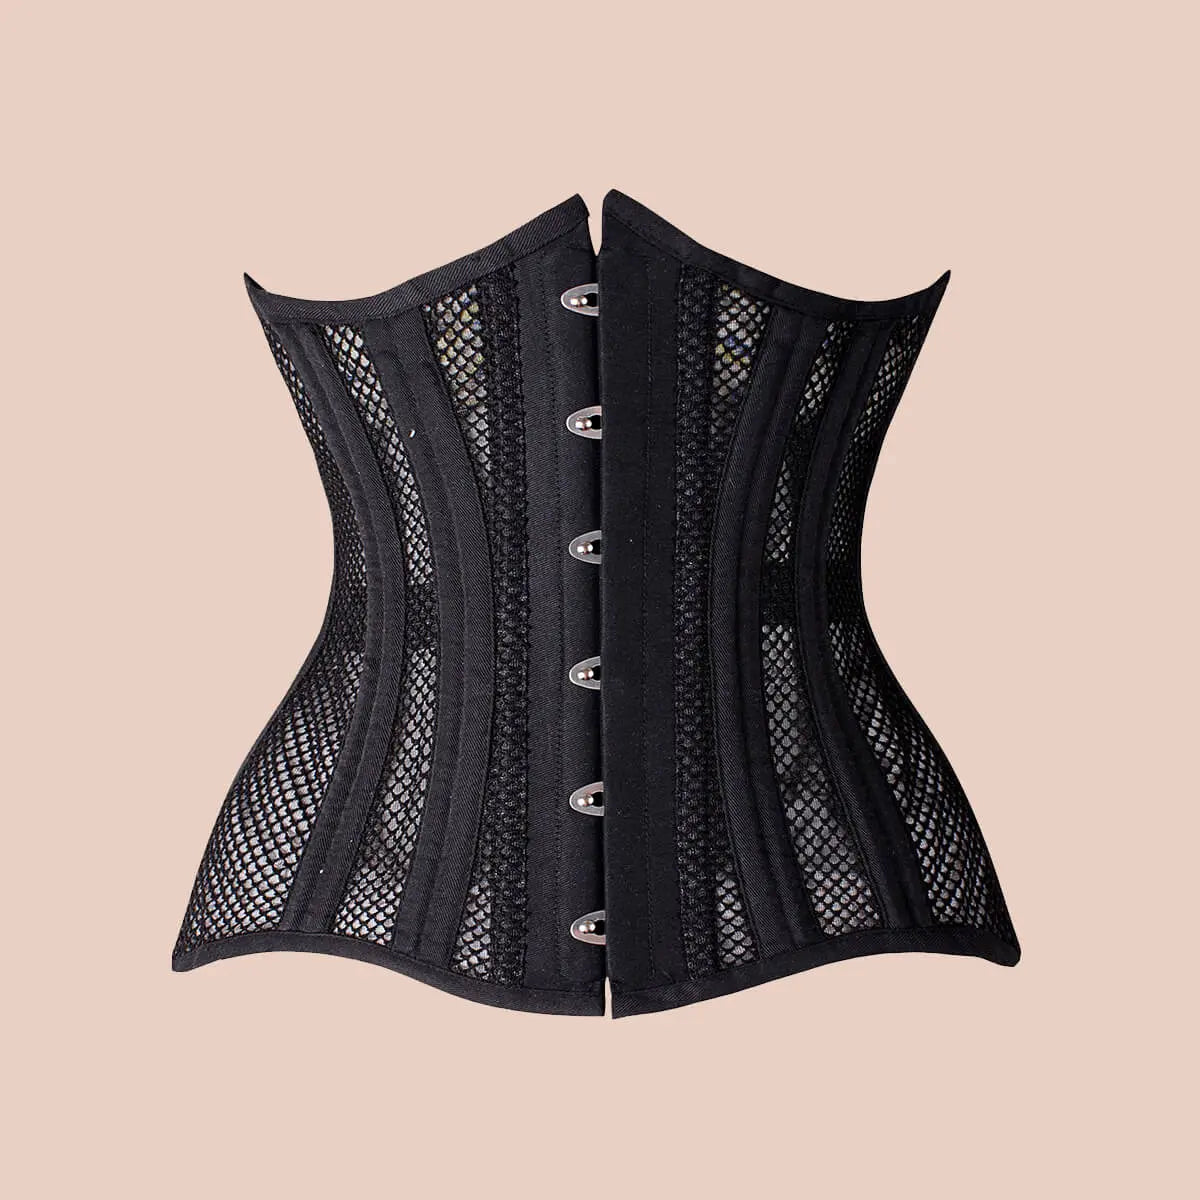 Waist Trainers  Best Selling Corset, Weight Loss